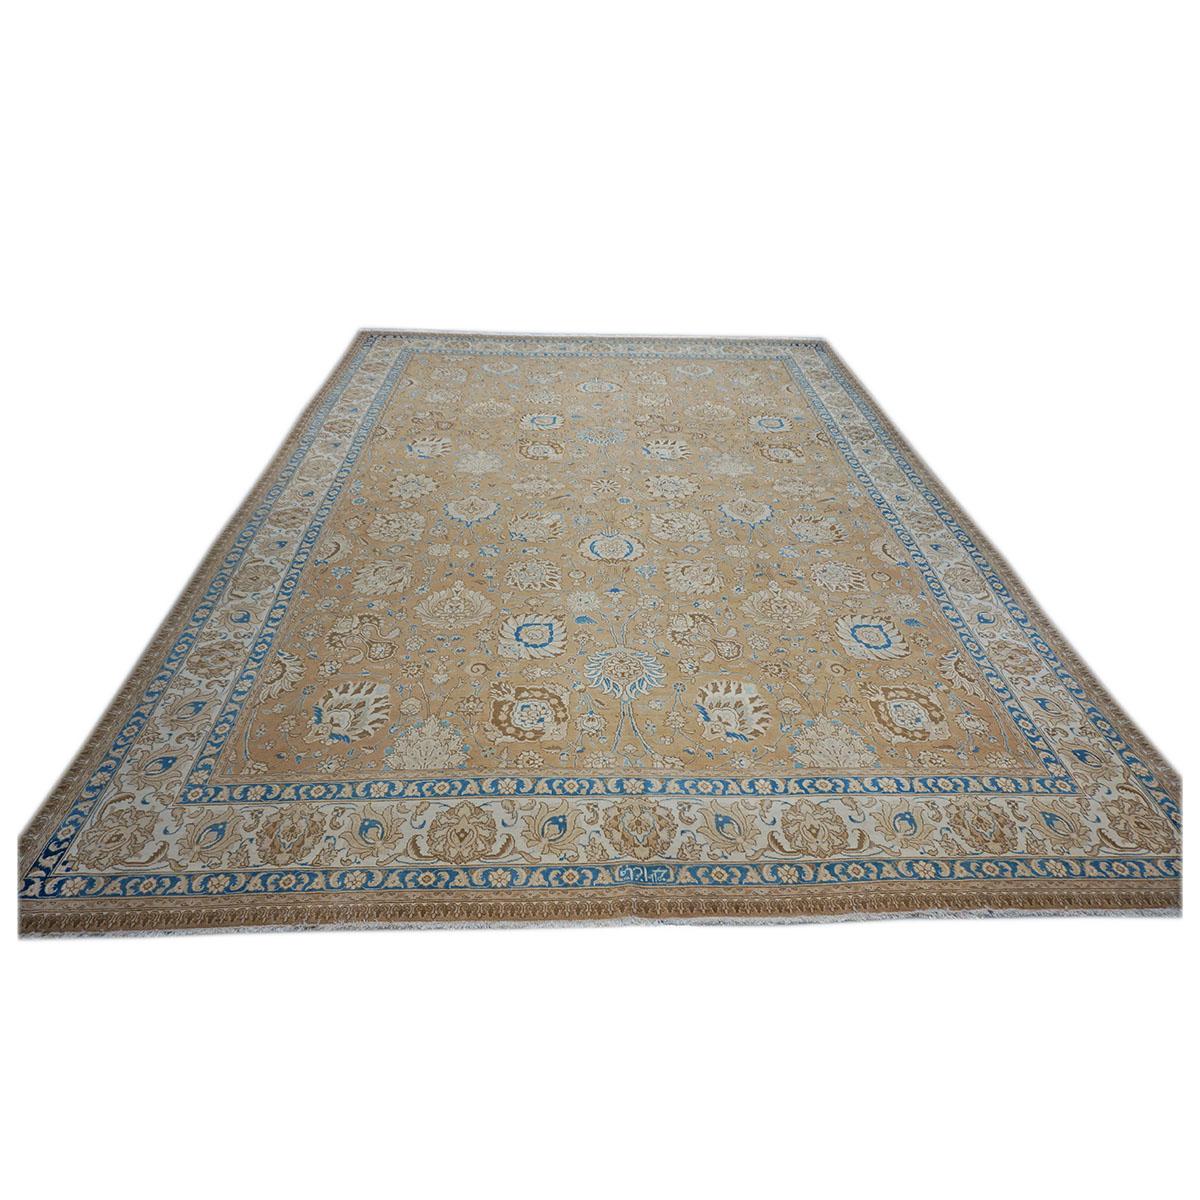 Antique 1940s Persian Tabriz 11x15 Brown, Tan, & Blue Handmade Area Rug In Good Condition For Sale In Houston, TX